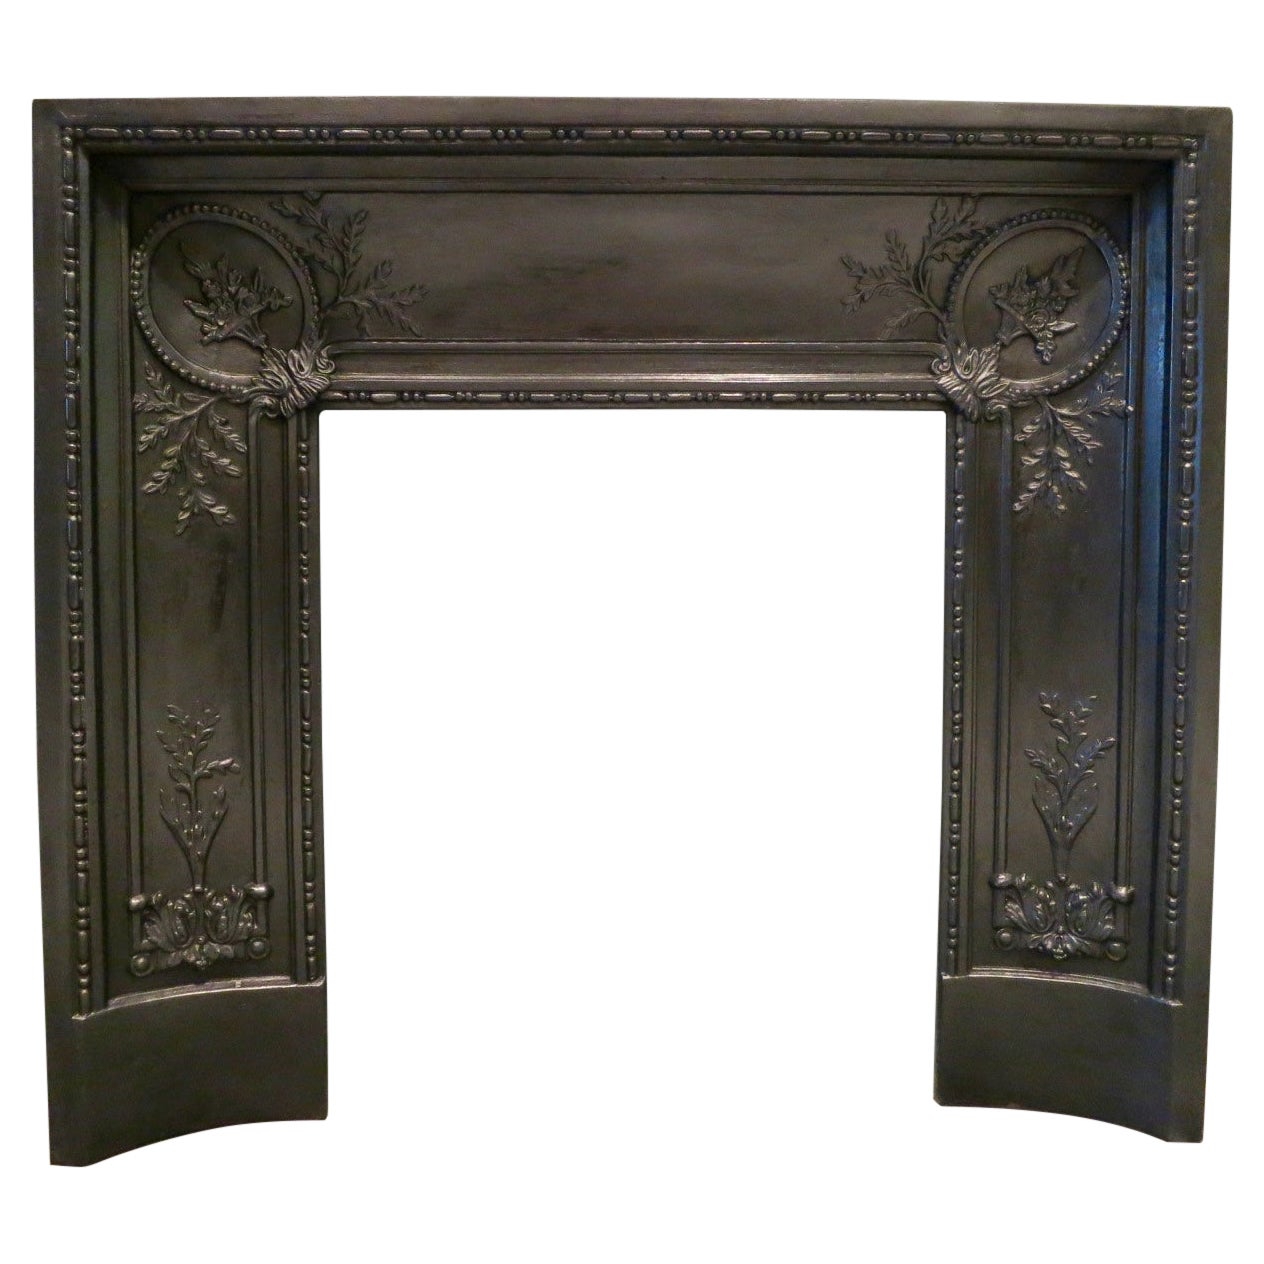 Antique French Cast Iron Fireplace Insert